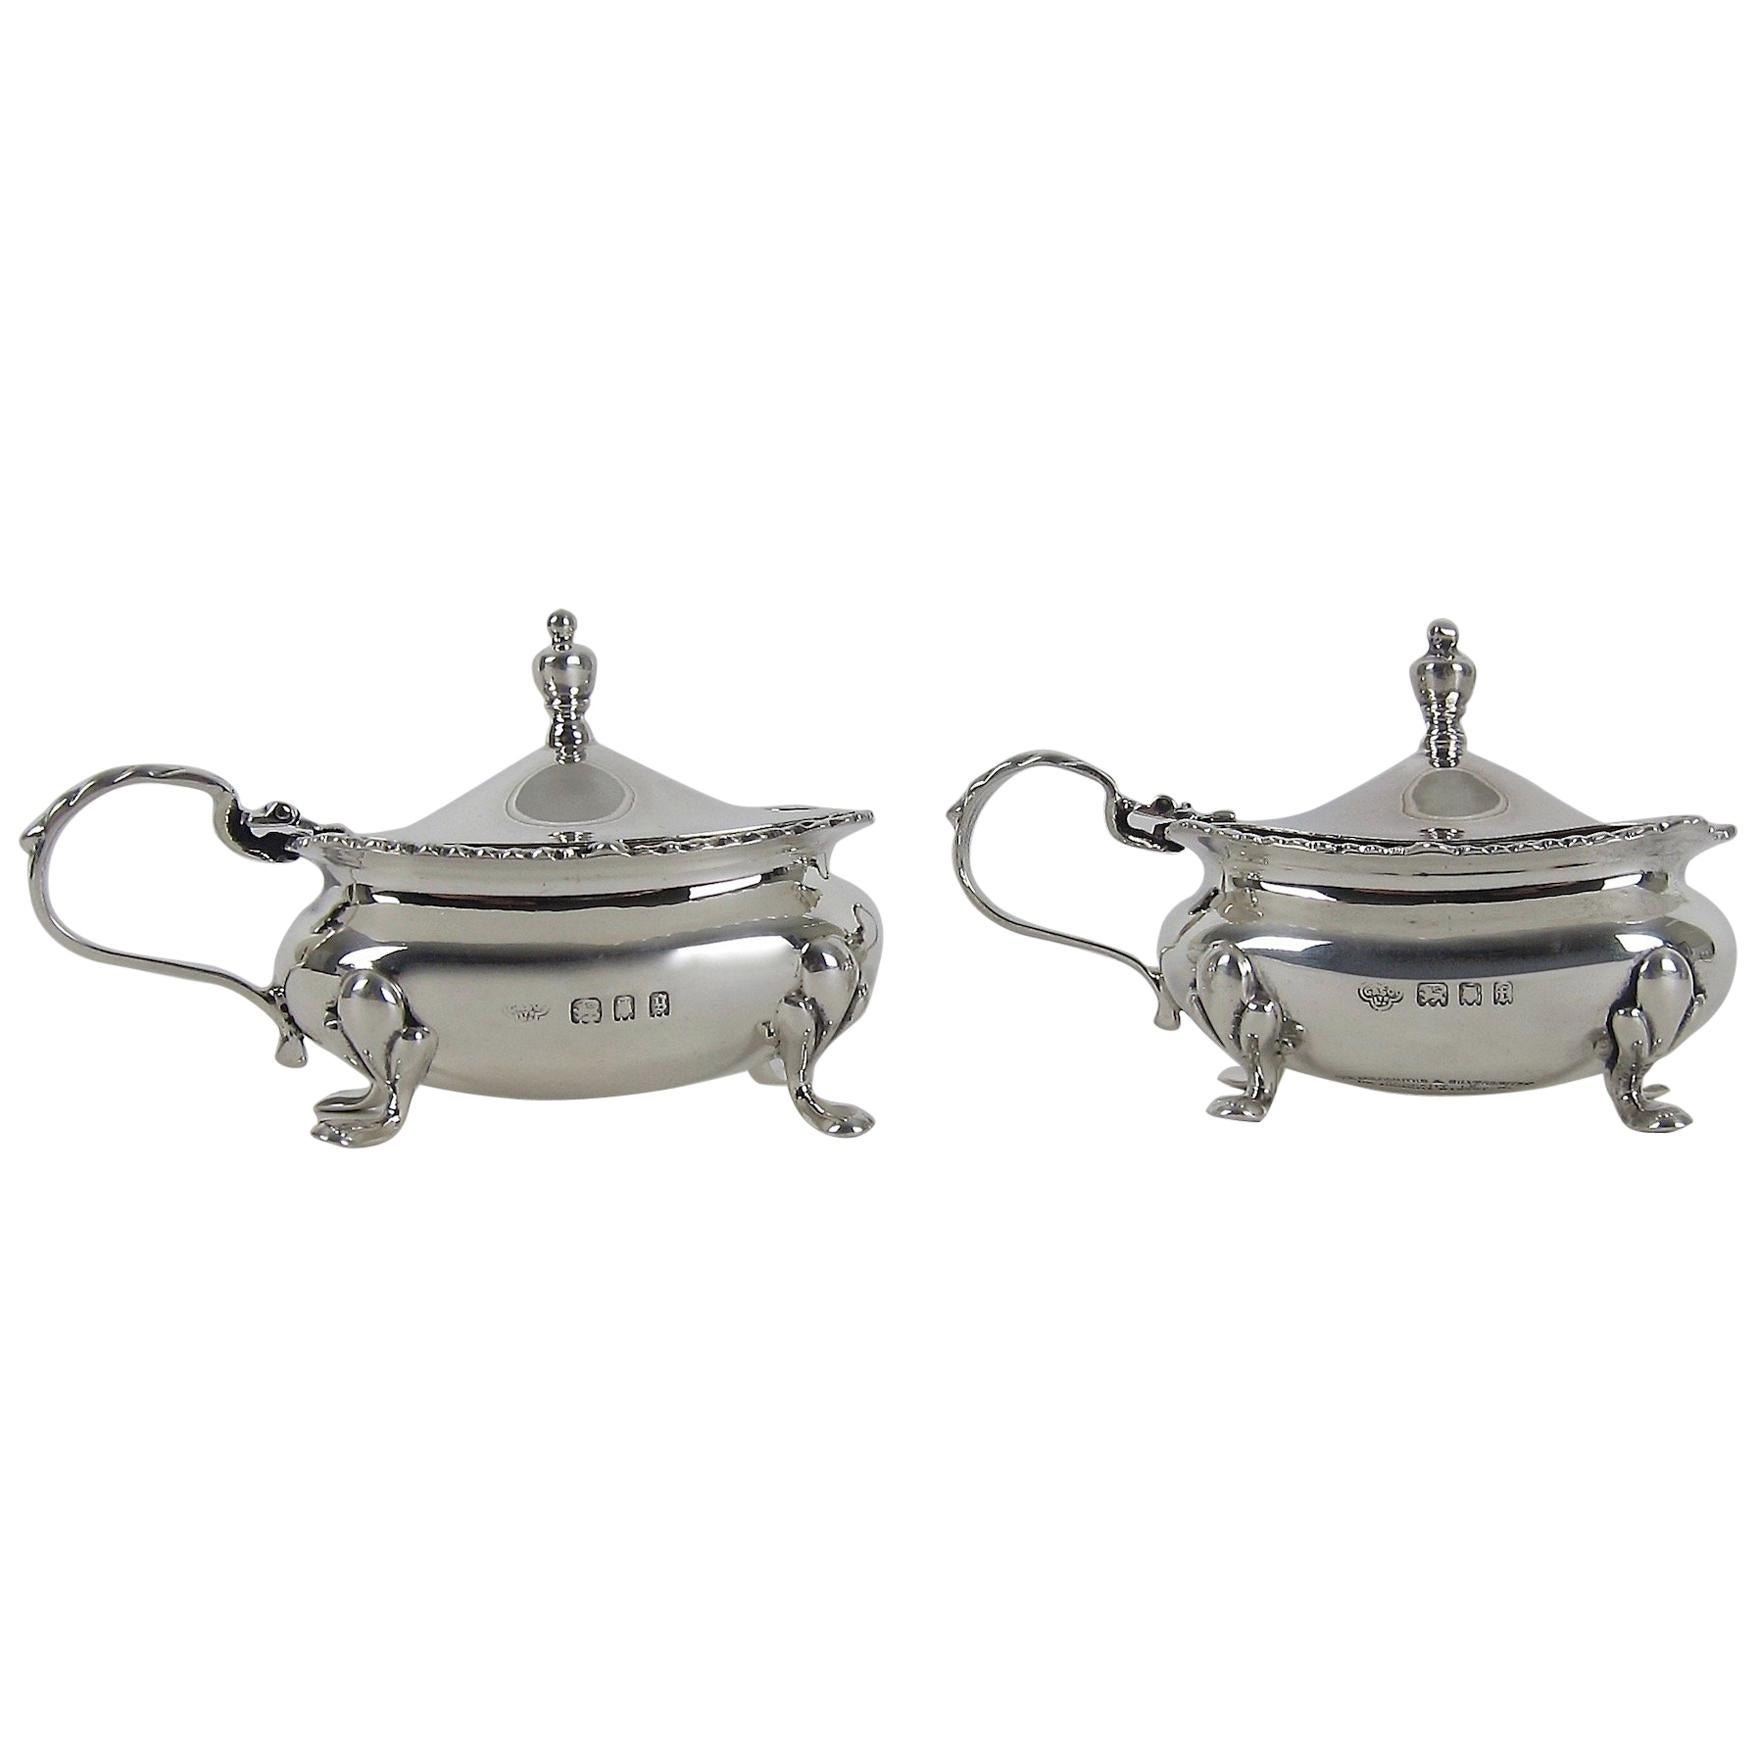 Antique Sterling Silver Mustard Pots from the Goldsmiths & Silversmiths Co Ltd